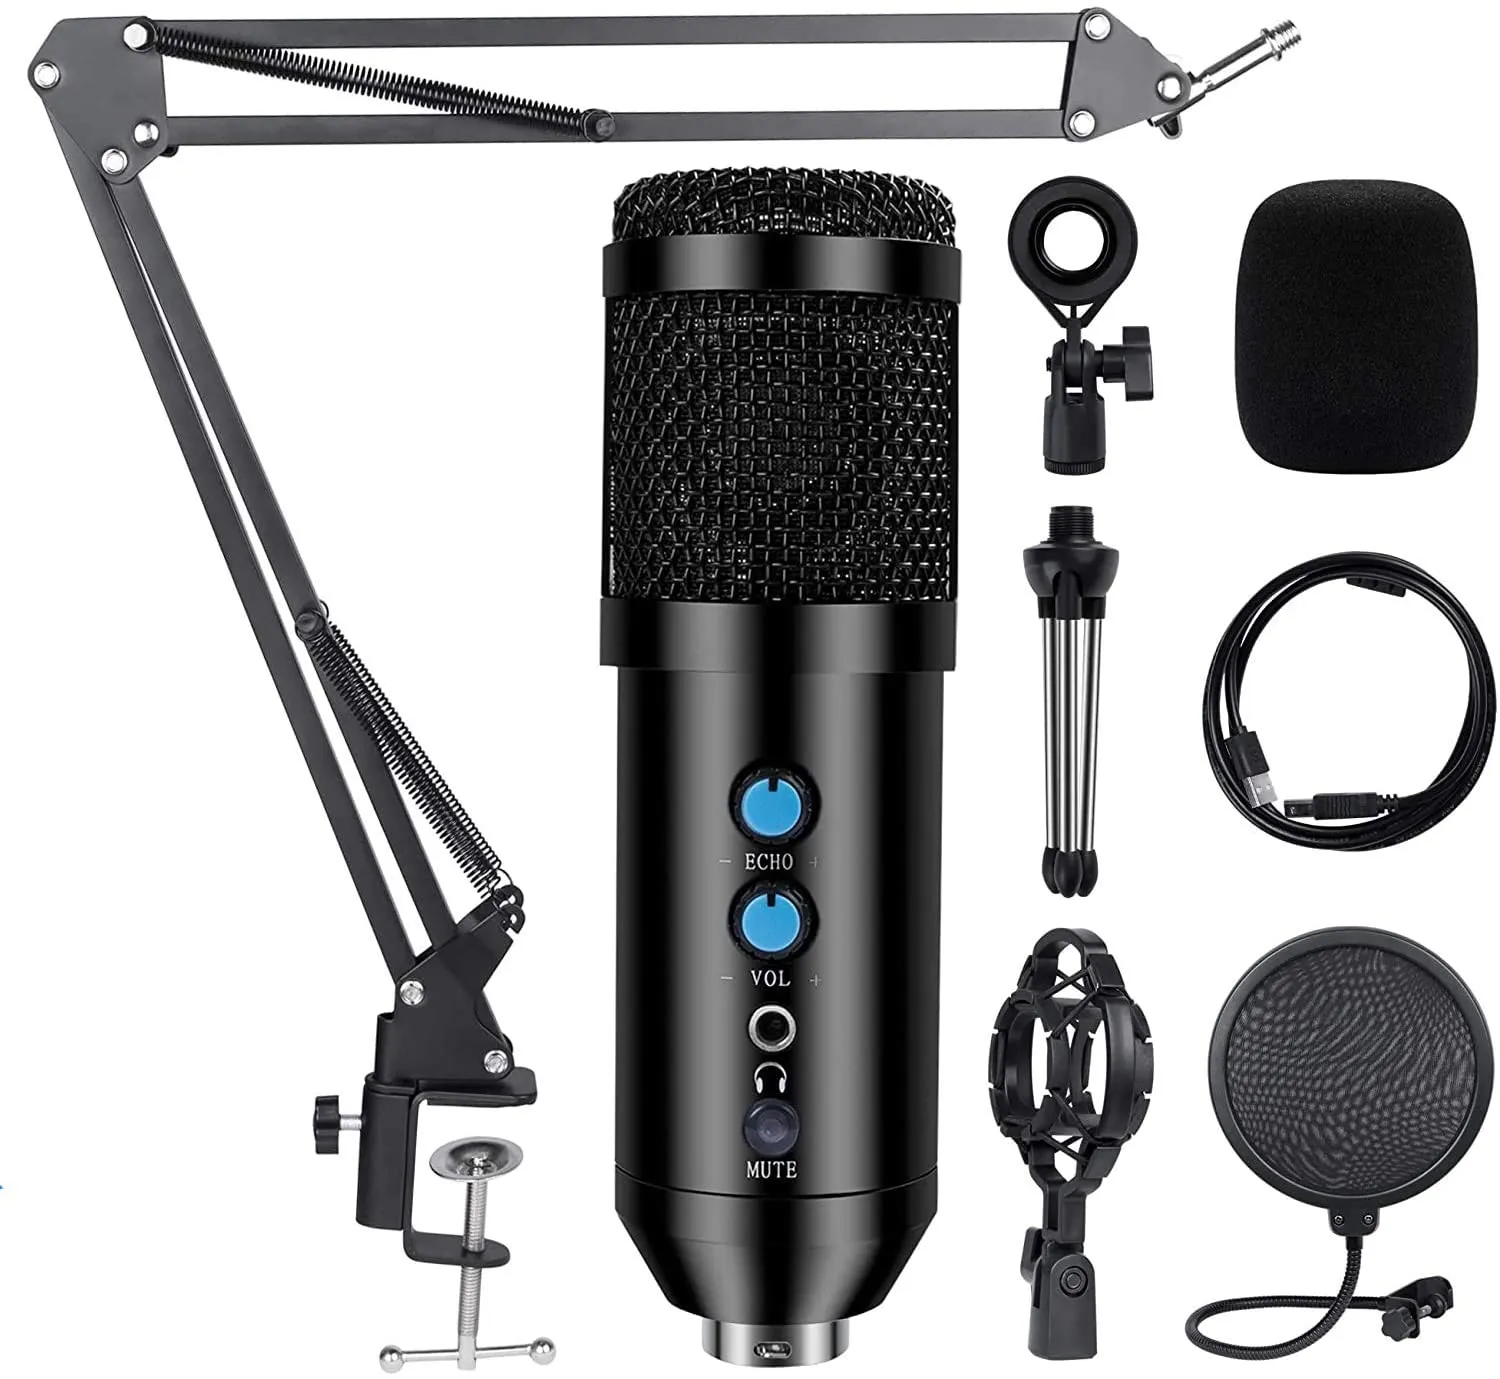 Buy Blue Yeti USB Streaming Gaming Podcast PC Microphone - Black